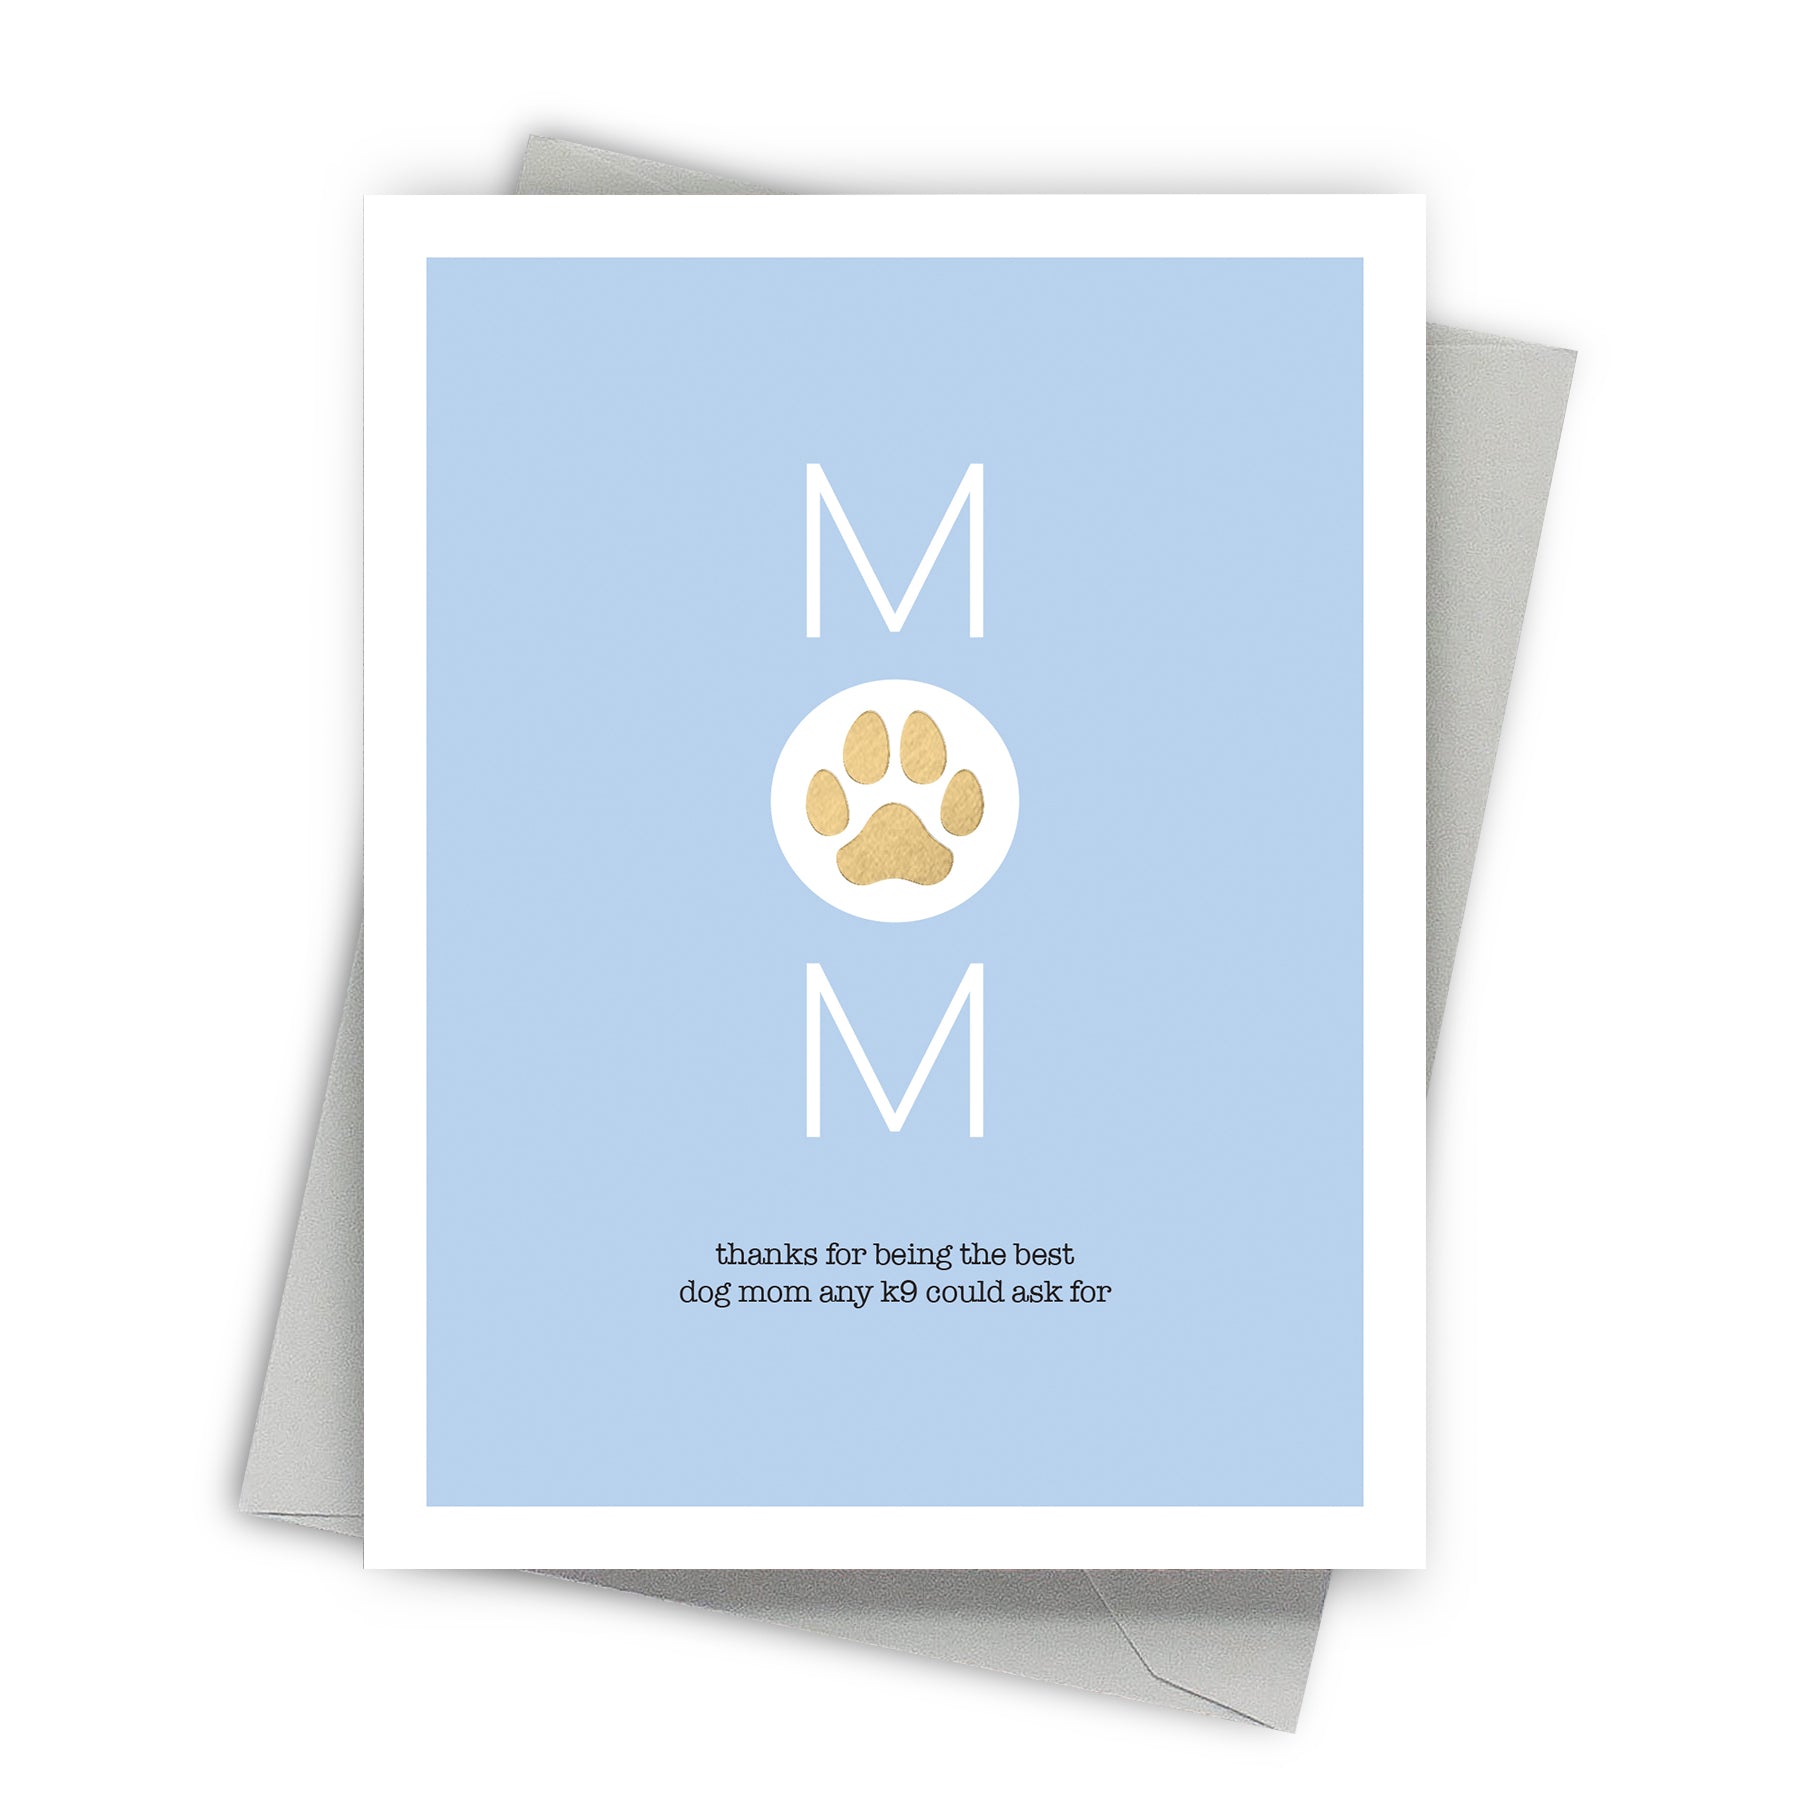 K9 Mom Mother's Day Card by Fine Moments